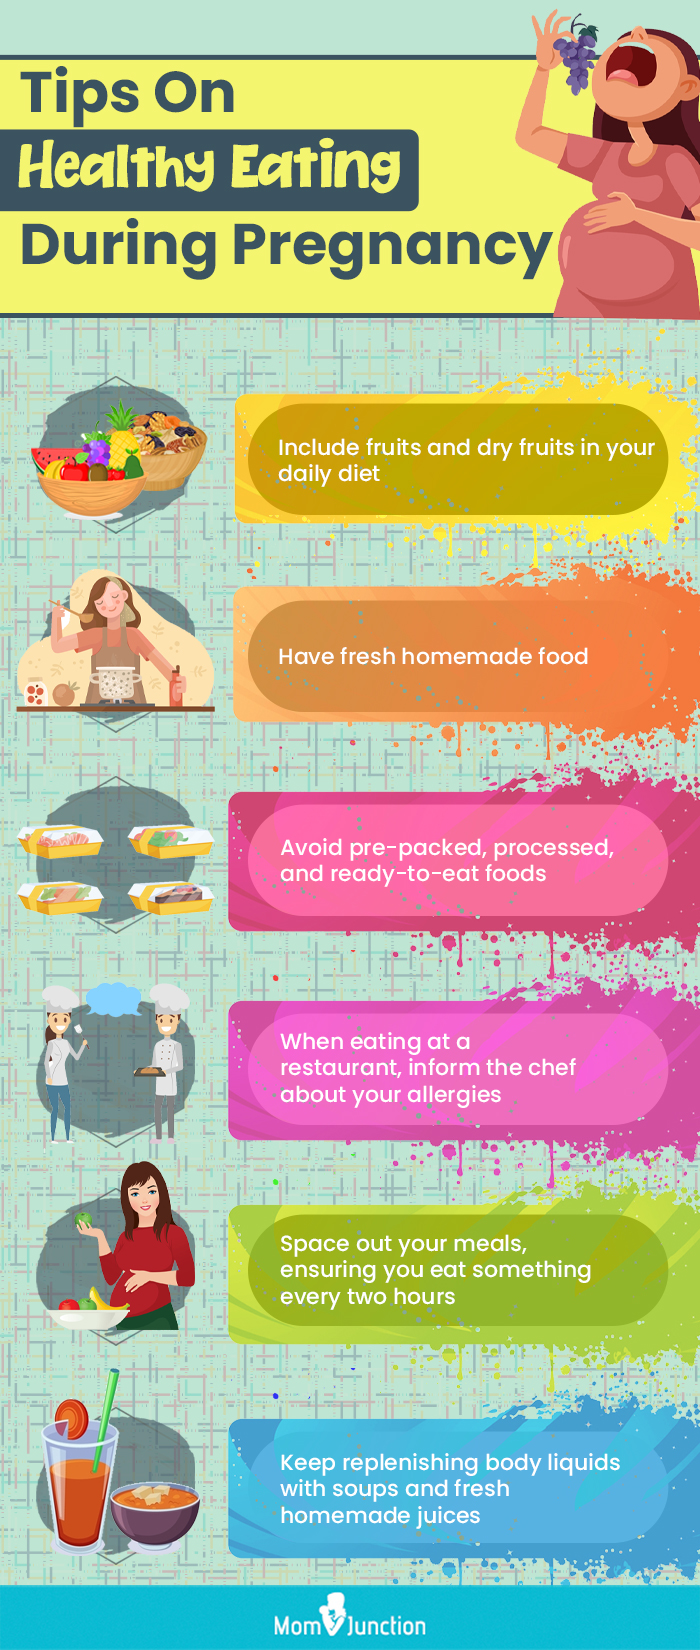 tips on healthy eating during pregnancy (infographic)